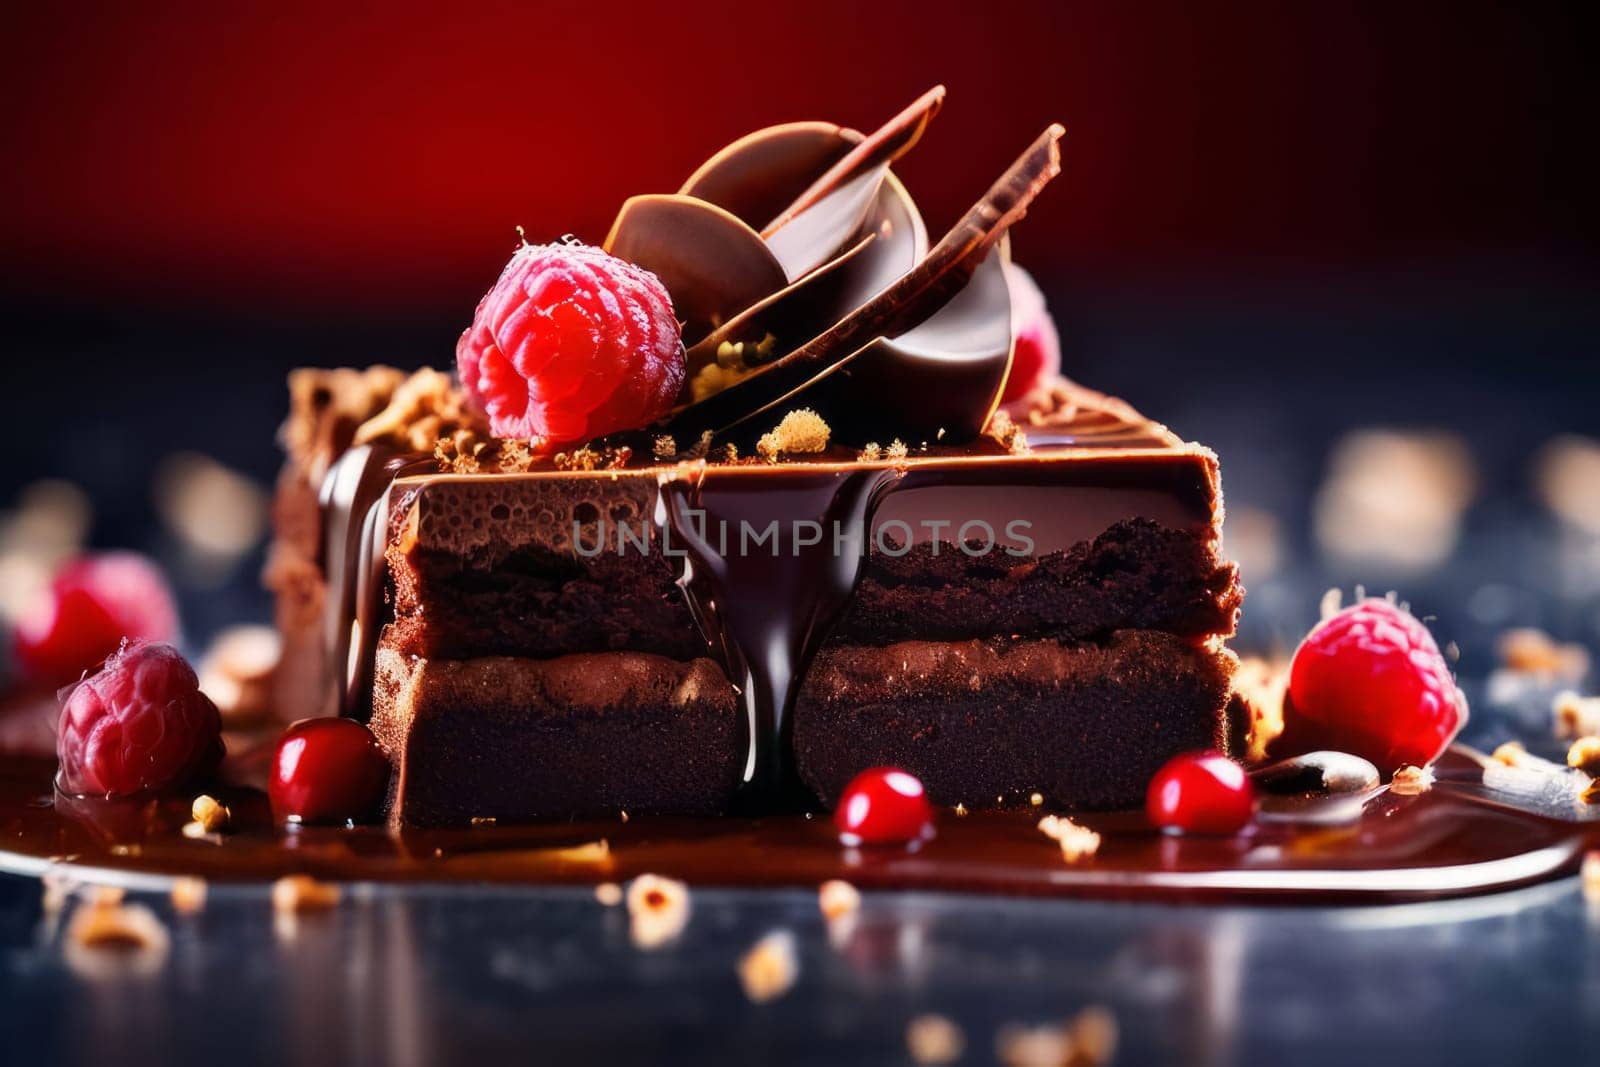 Chocolate cake with raspberries, chocolate sauce. Cake is adorned with fresh raspberries, exquisite chocolate sauce, creating delectable, luxurious dessert. For advertise cafe, patisserie, restaurant. by Angelsmoon